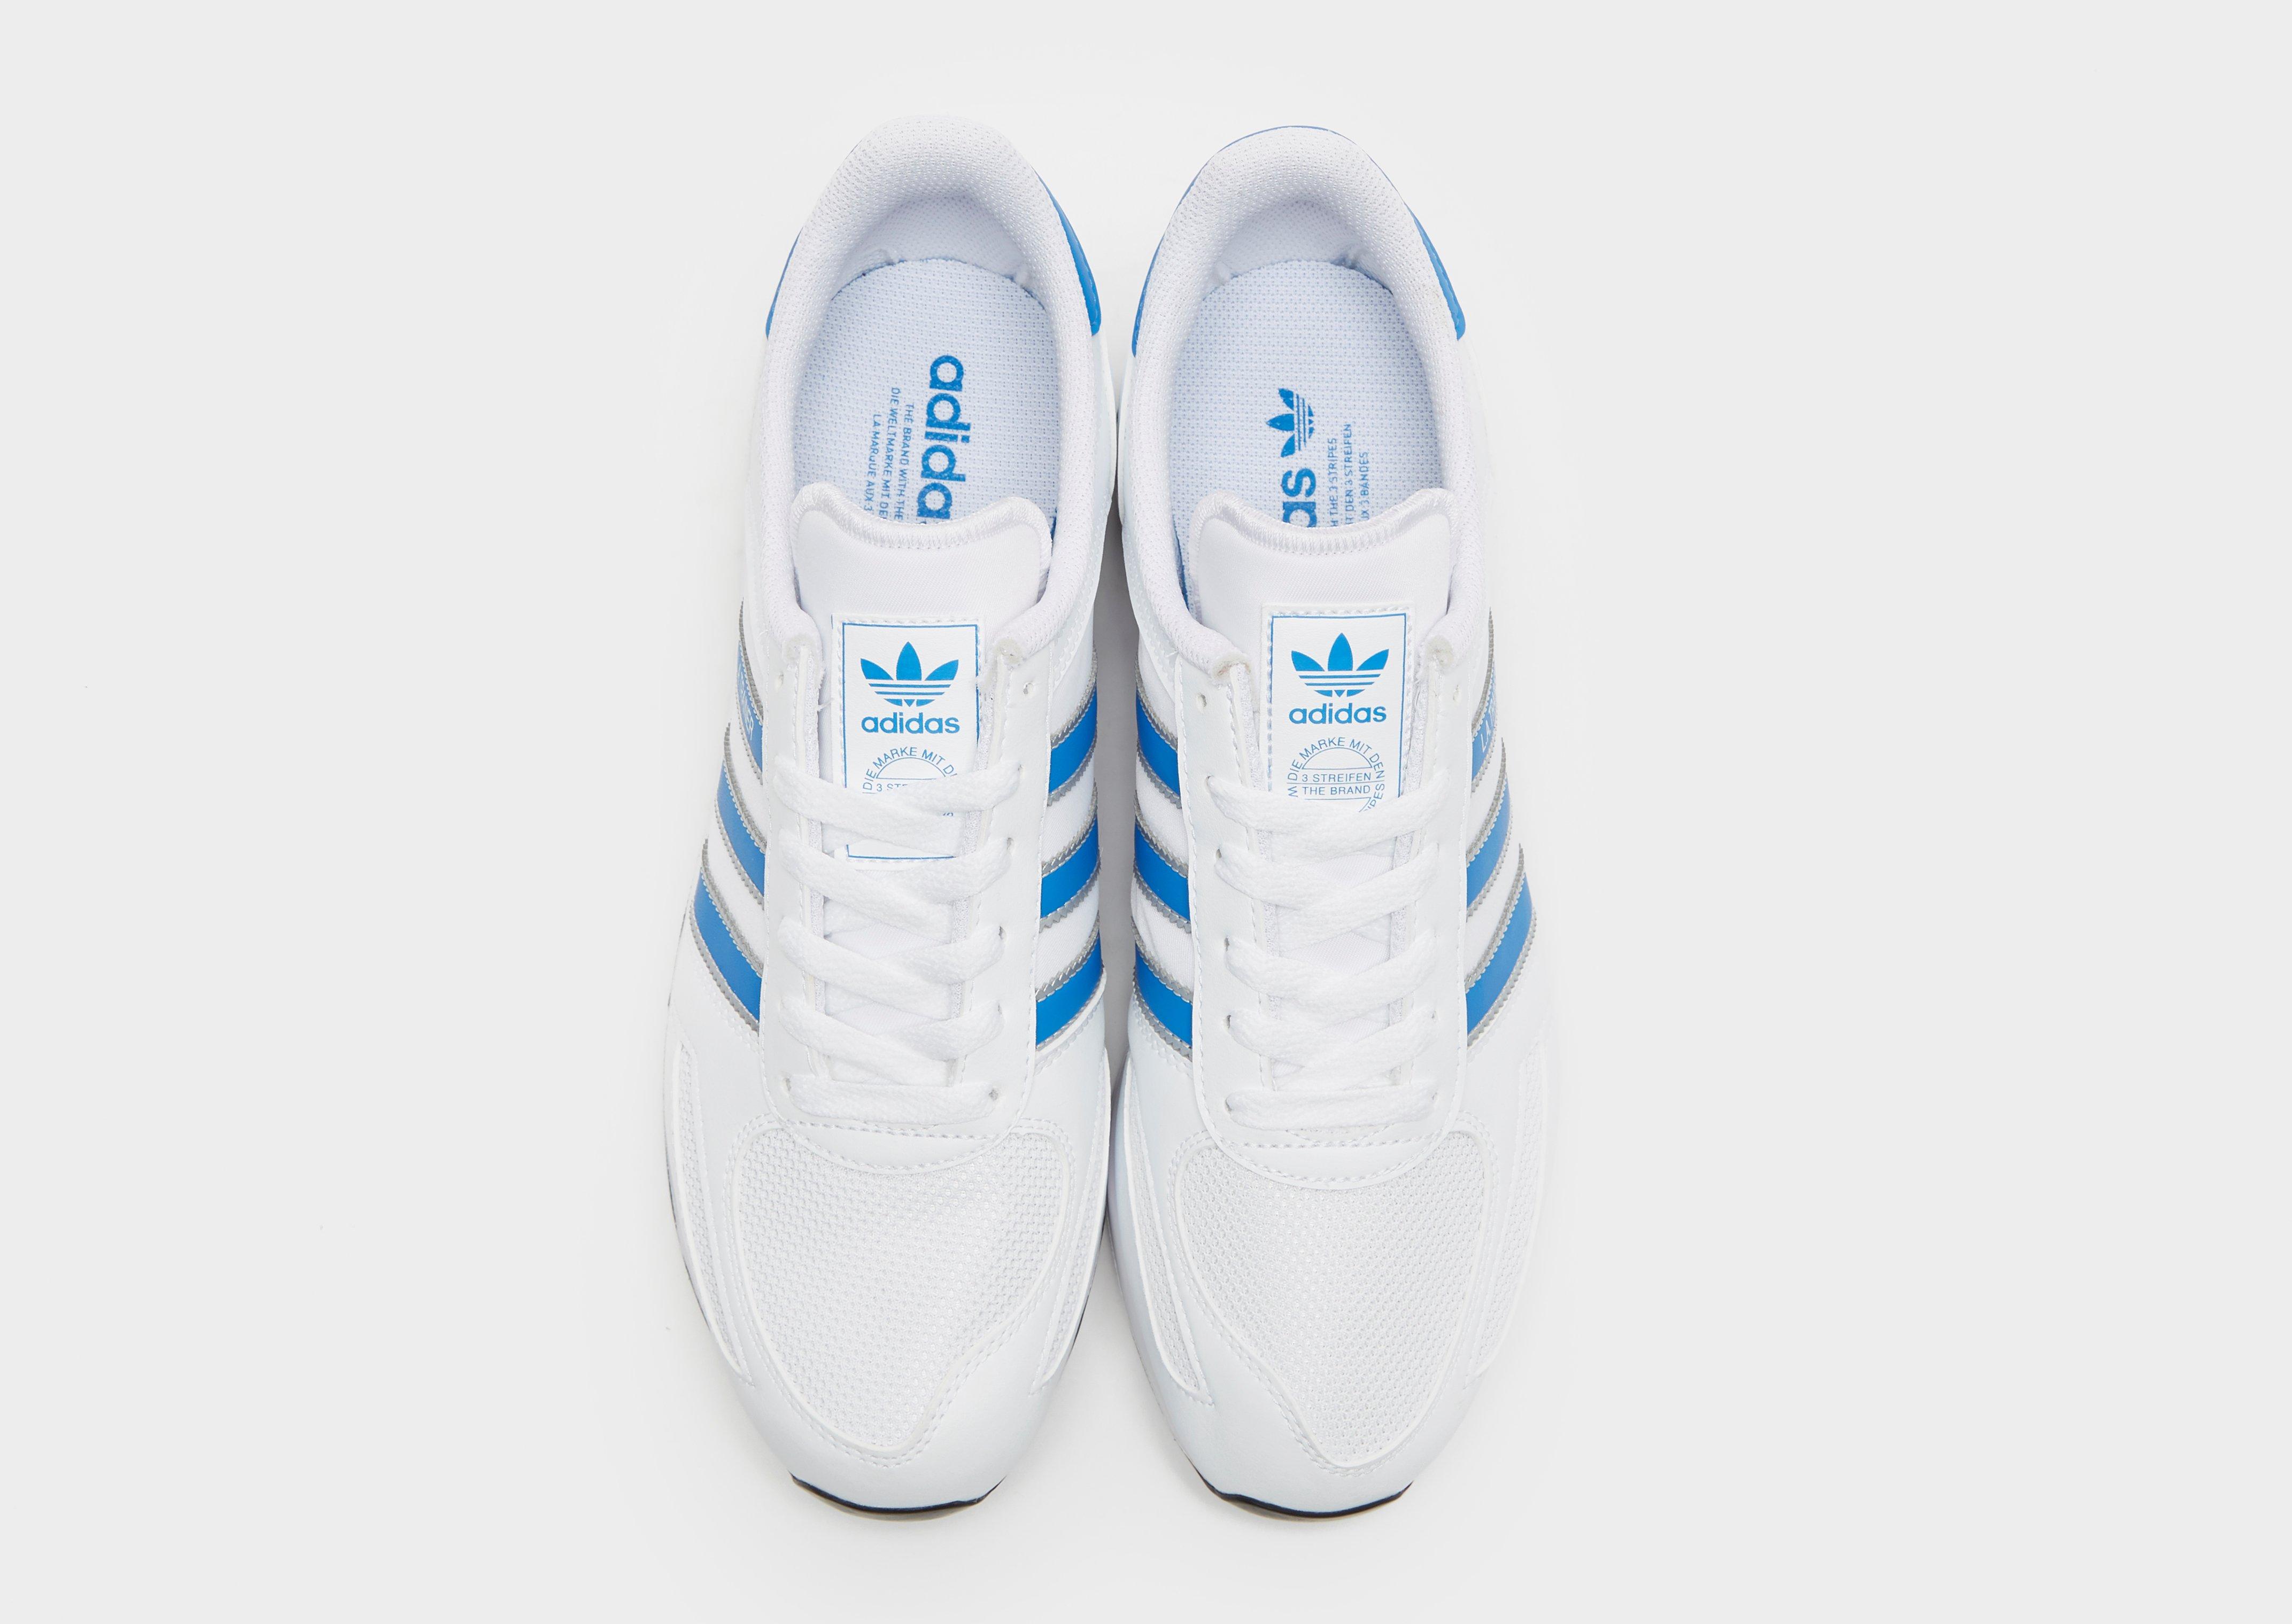 adidas white trainers jd